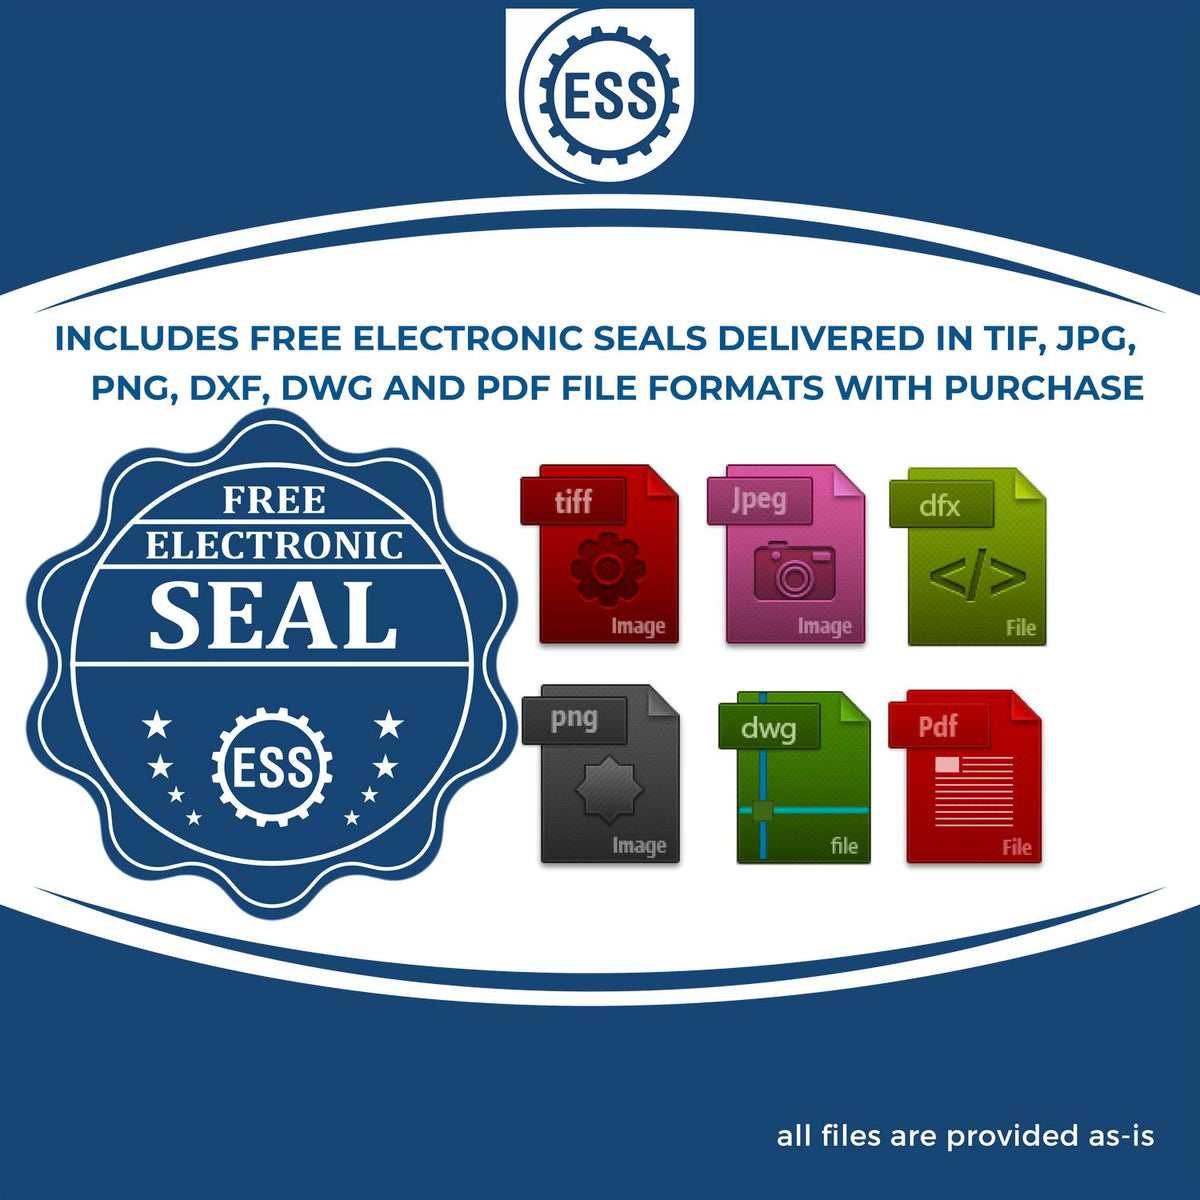 An infographic for the free electronic seal for the Self-Inking North Dakota PE Stamp illustrating the different file type icons such as DXF, DWG, TIF, JPG and PNG.